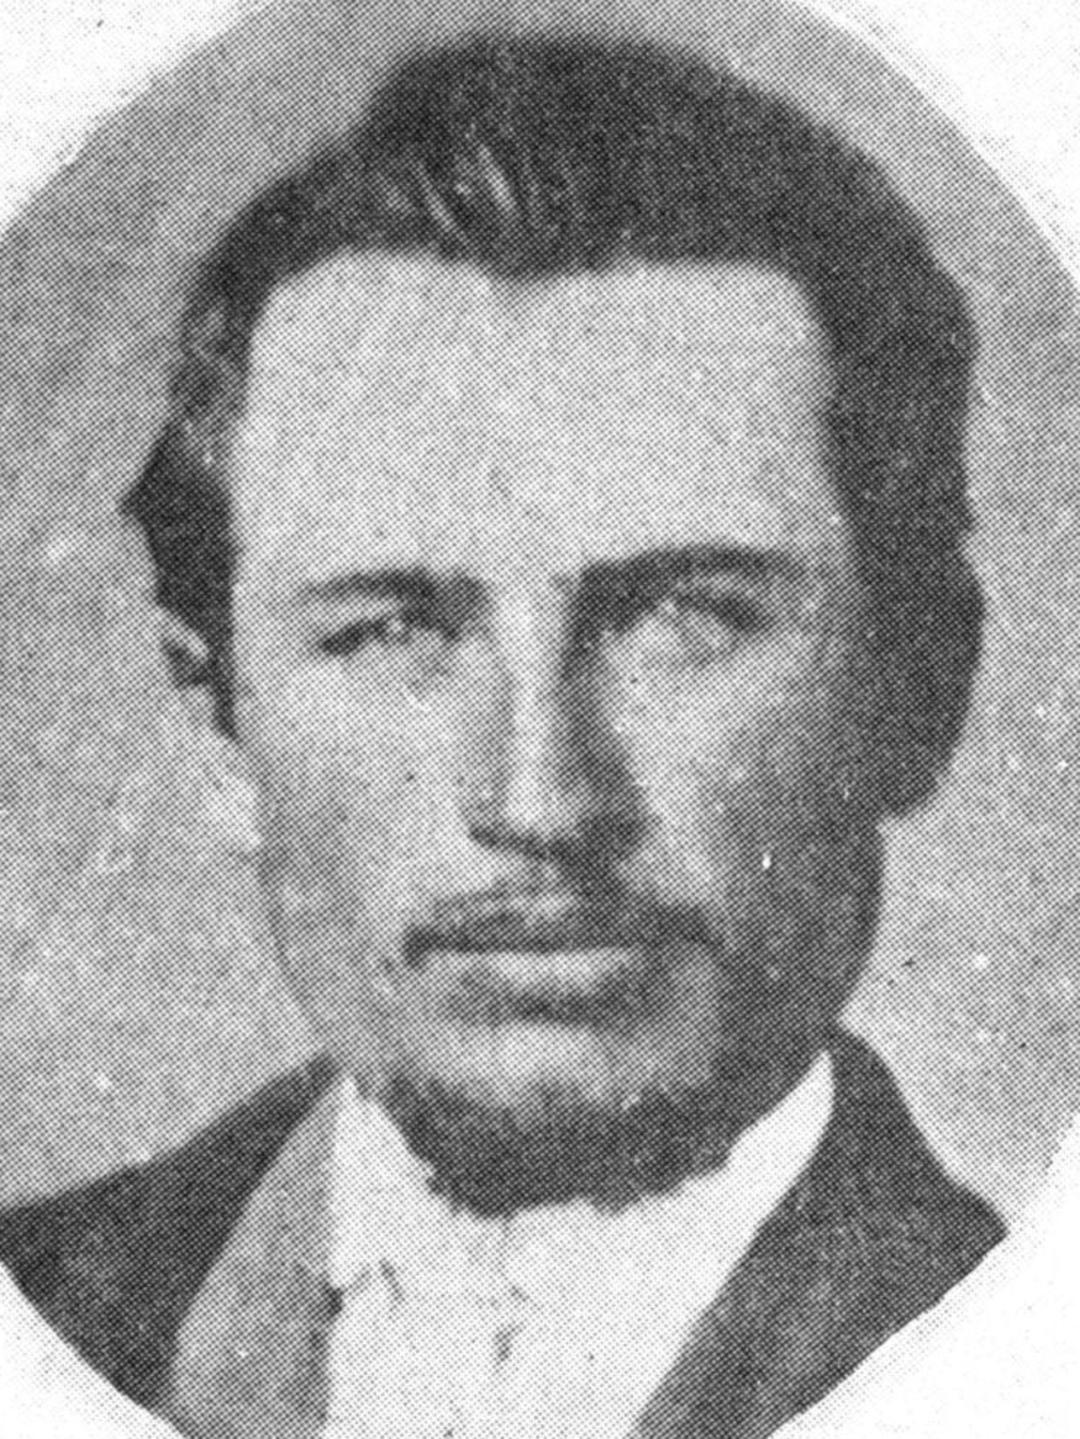 Hyrum Strong (1845 - 1911) Profile